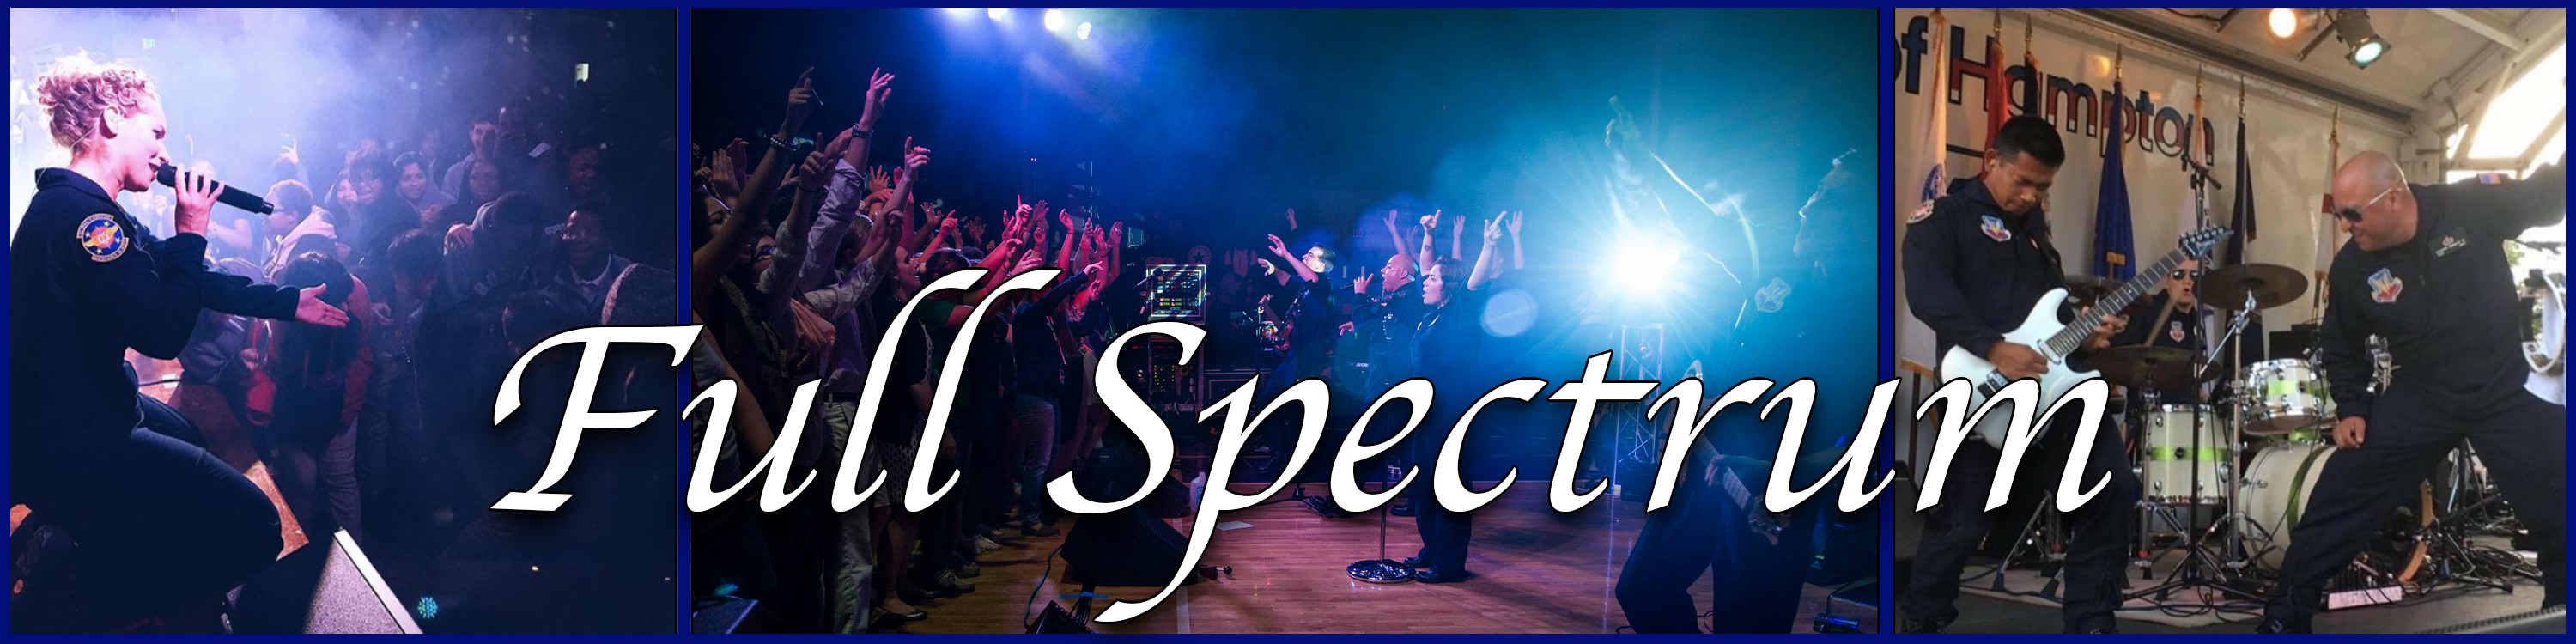 A three-part graphic created to show three scenes of the rock group Full Spectrum. There is a blue border around the outside and between the images. On the left is a close photo of a singer kneeling on stage in front of a clamoring audience, in the center the full group performs under glaring blue stage lights as a crowd goes wild, and on the right a guitarist in a dark blue flight suit leans into a solo as another performer rocks on to draw attention to him. White text above them all reads "Full Spectrum" in italics.